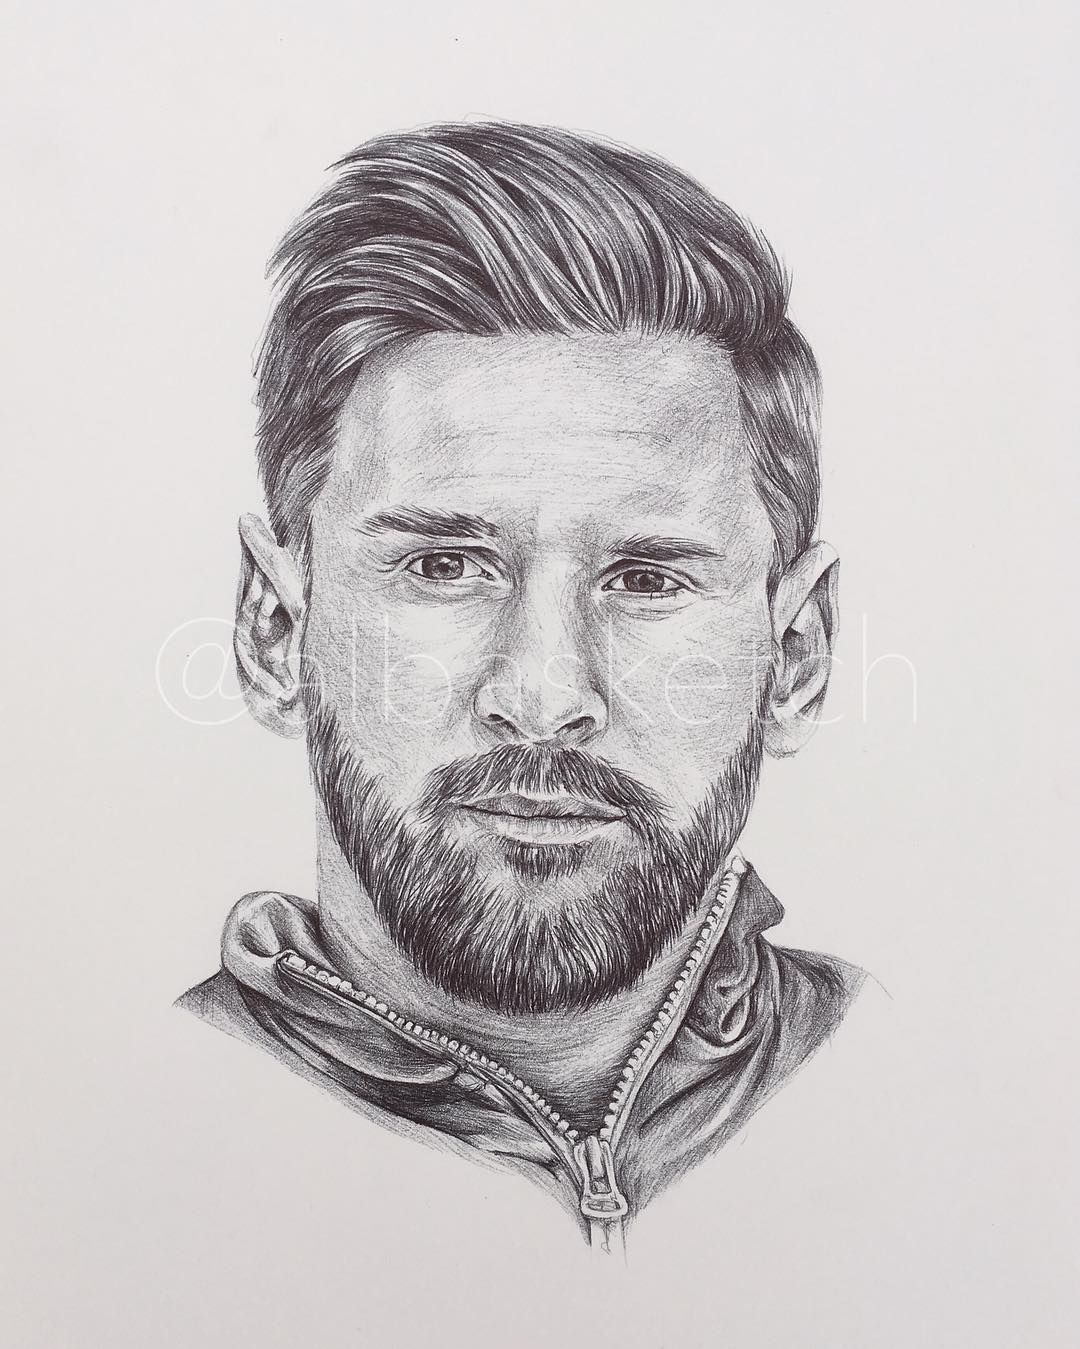 Followers, 91 Following, 313 Posts Instagram photo and videos from alba paleo. Lionel messi, Messi, Soccer drawing